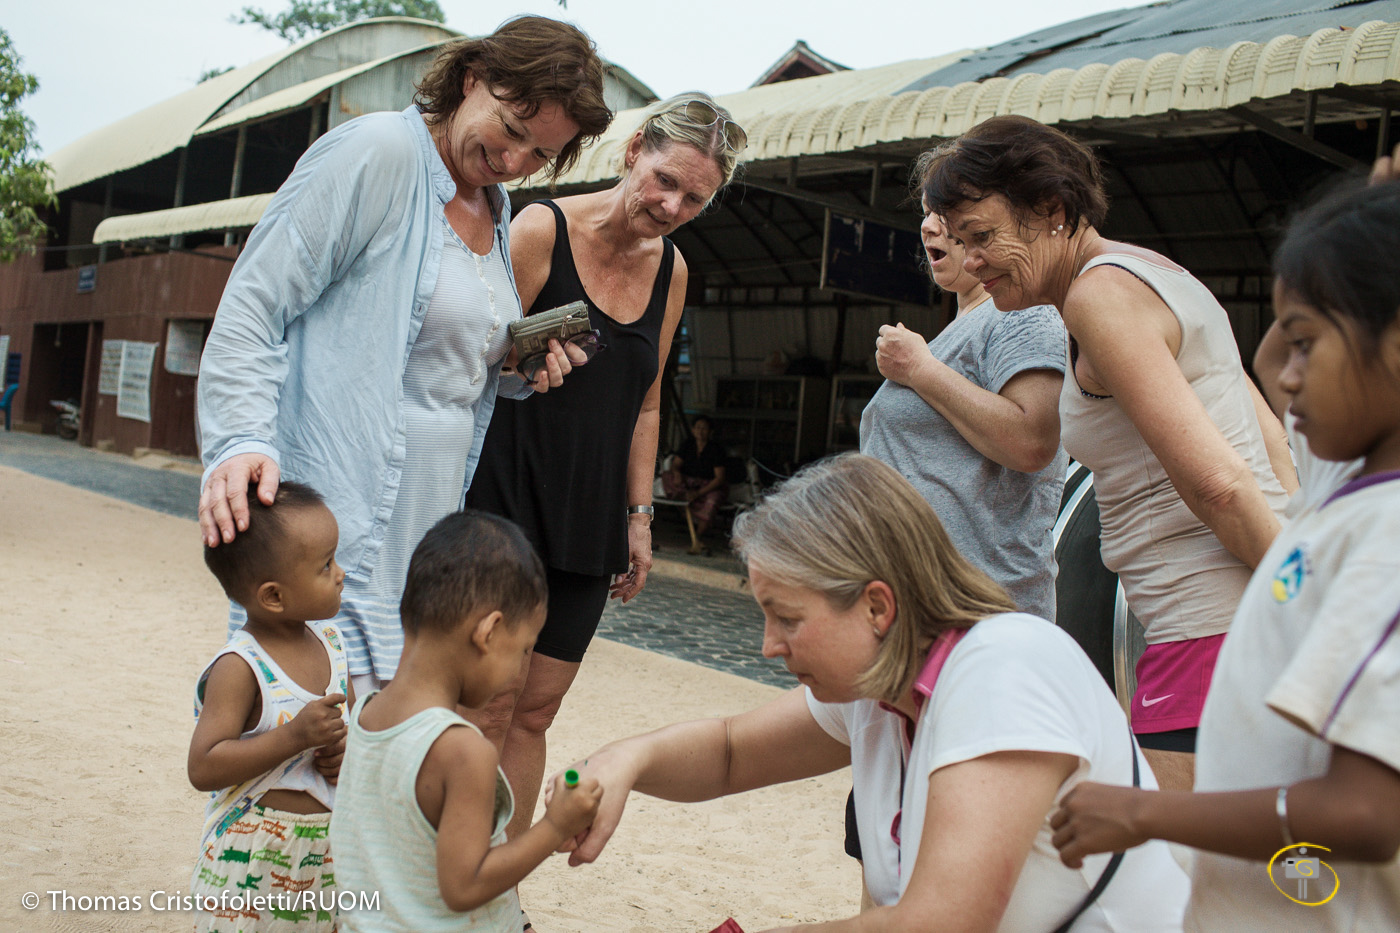 04/04/2013 - Siem Reap (Cambodia). A group of tourists from Norway visits Acodo, one of the largest and most visited orphanage in Siem Reap. Playing with and hugging the children may make a tremendous impact on the tourists - and a great photo opportunity - but does little to support the needs of the children. © Thomas Cristofoletti 2013